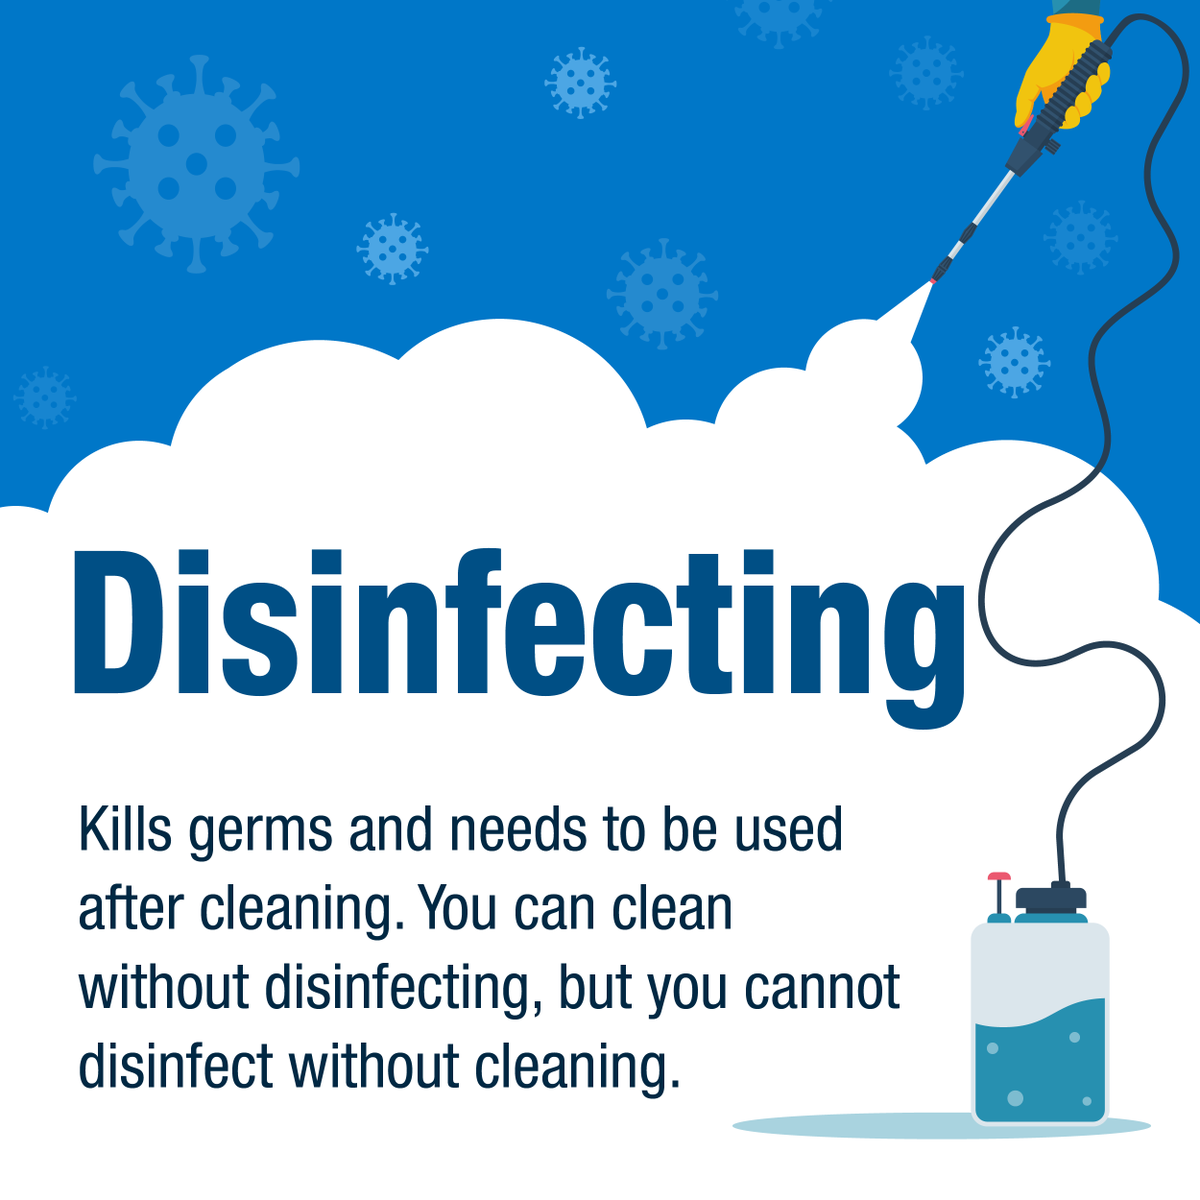 Remember, cleaning, sanitizing, and disinfecting are three different procedures. 

Our locations have many commercial cleaning, sanitizing, and disinfecting products. Contact us for help choosing the right products based on your needs. 

#nationalcleaningweek #springcleaning